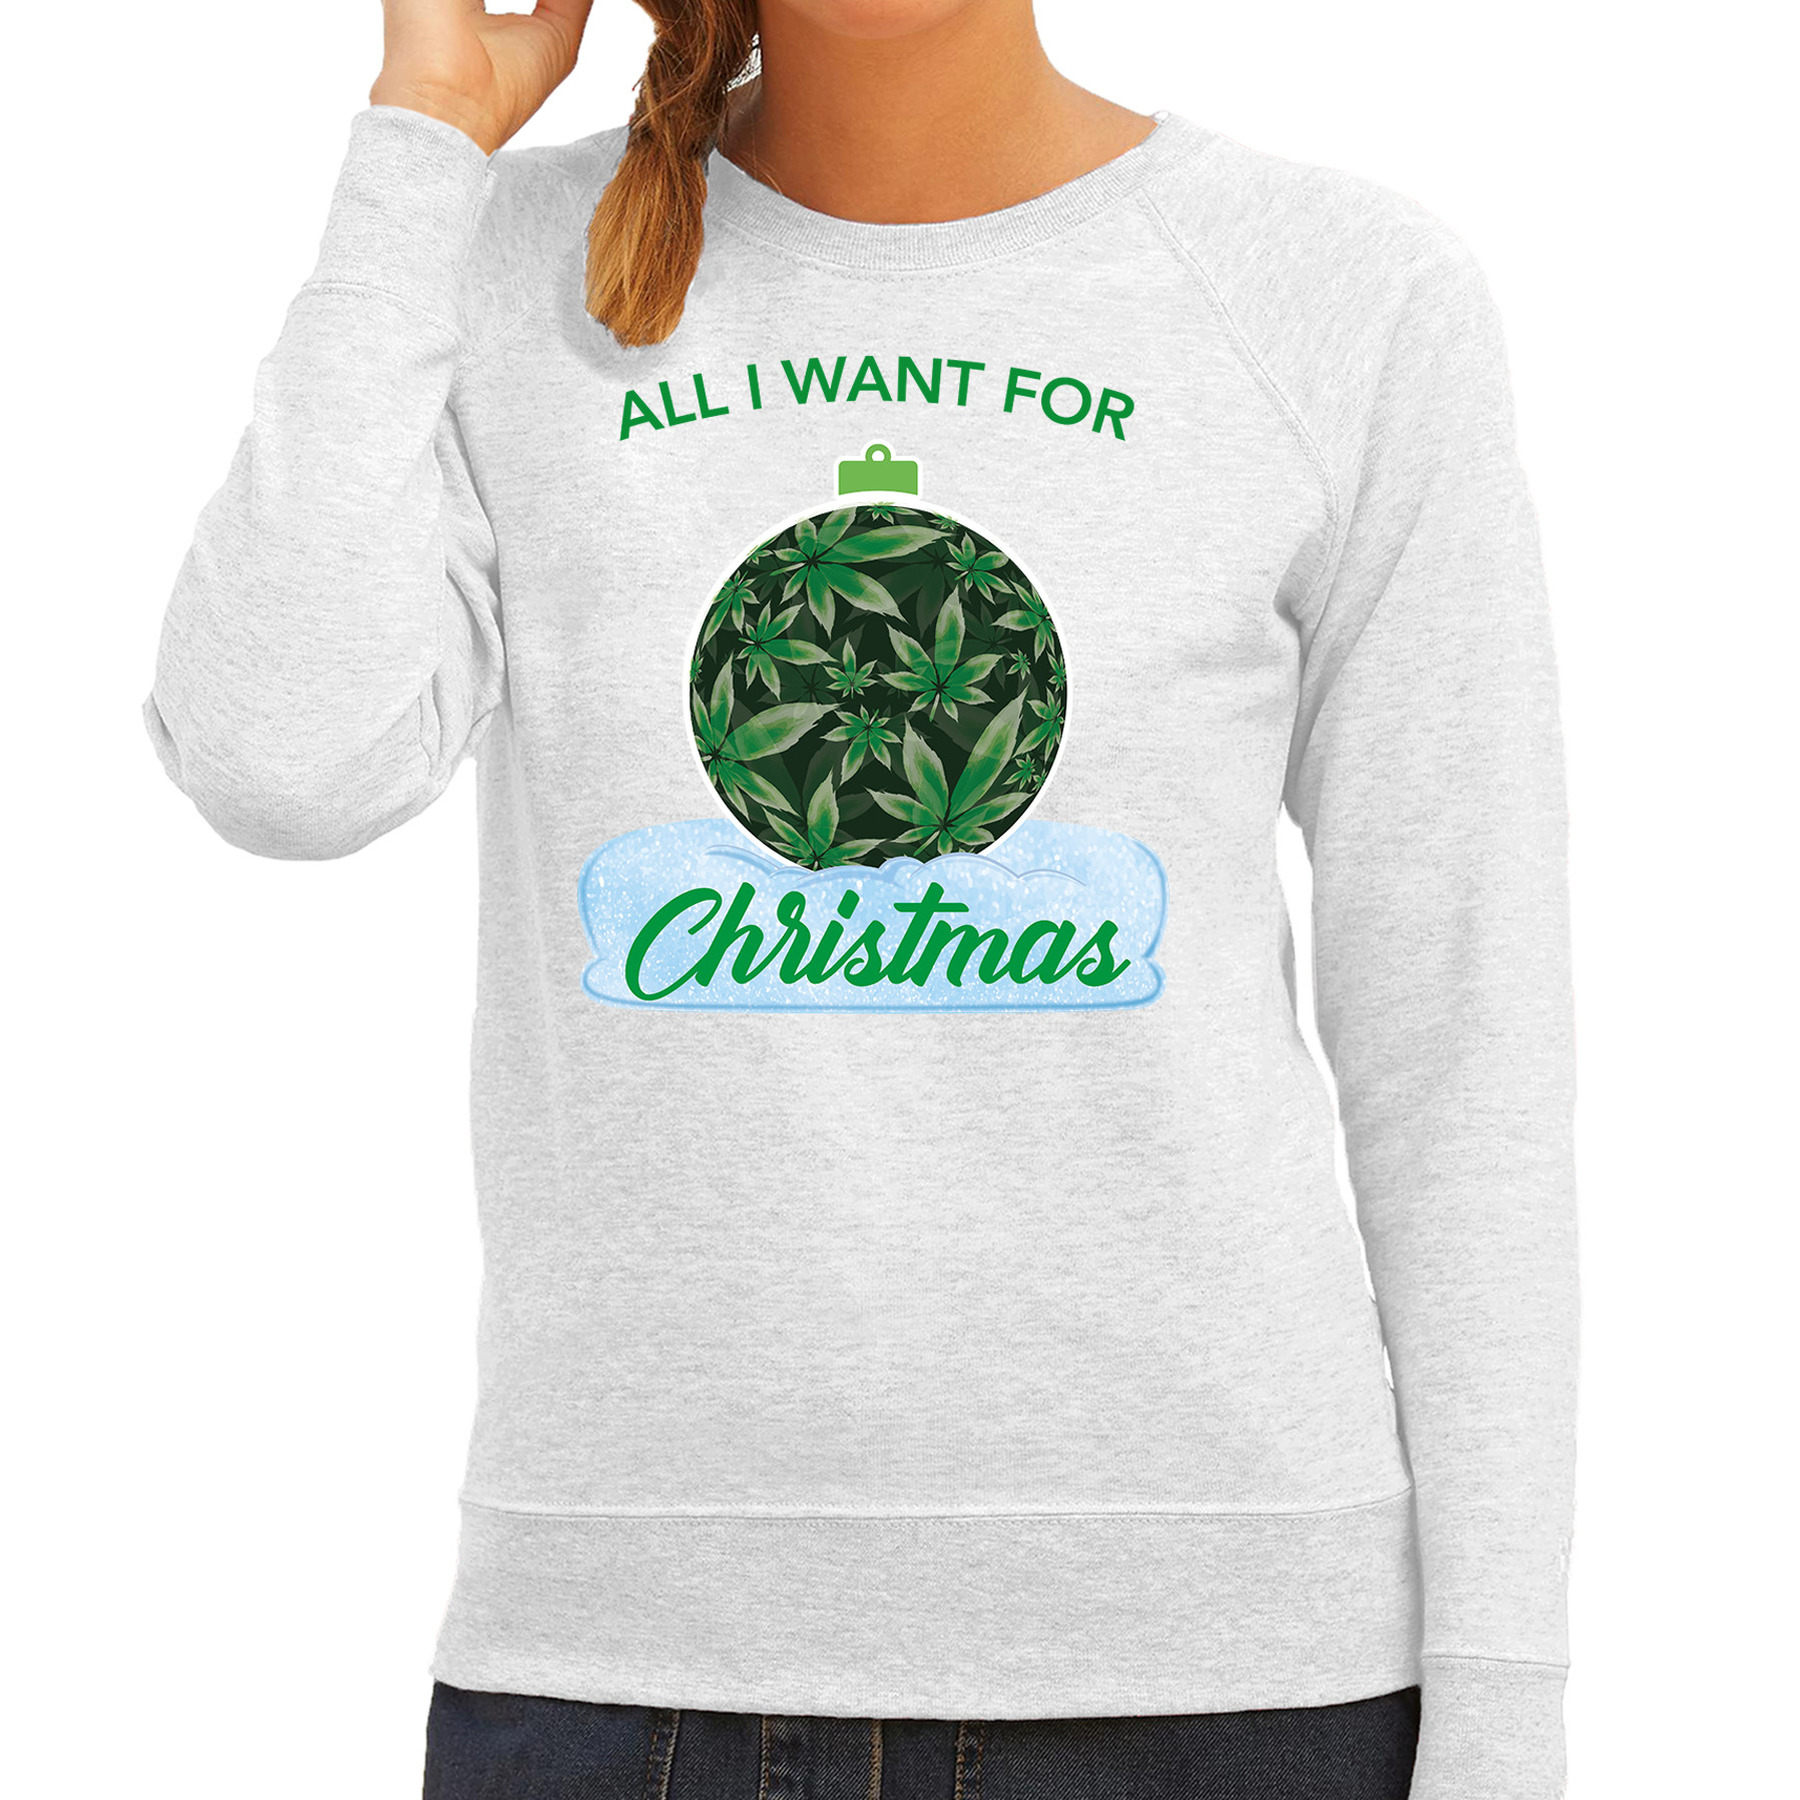 Wiet Kerstbal sweater-outfit All i want for Christmas grijs voor dames